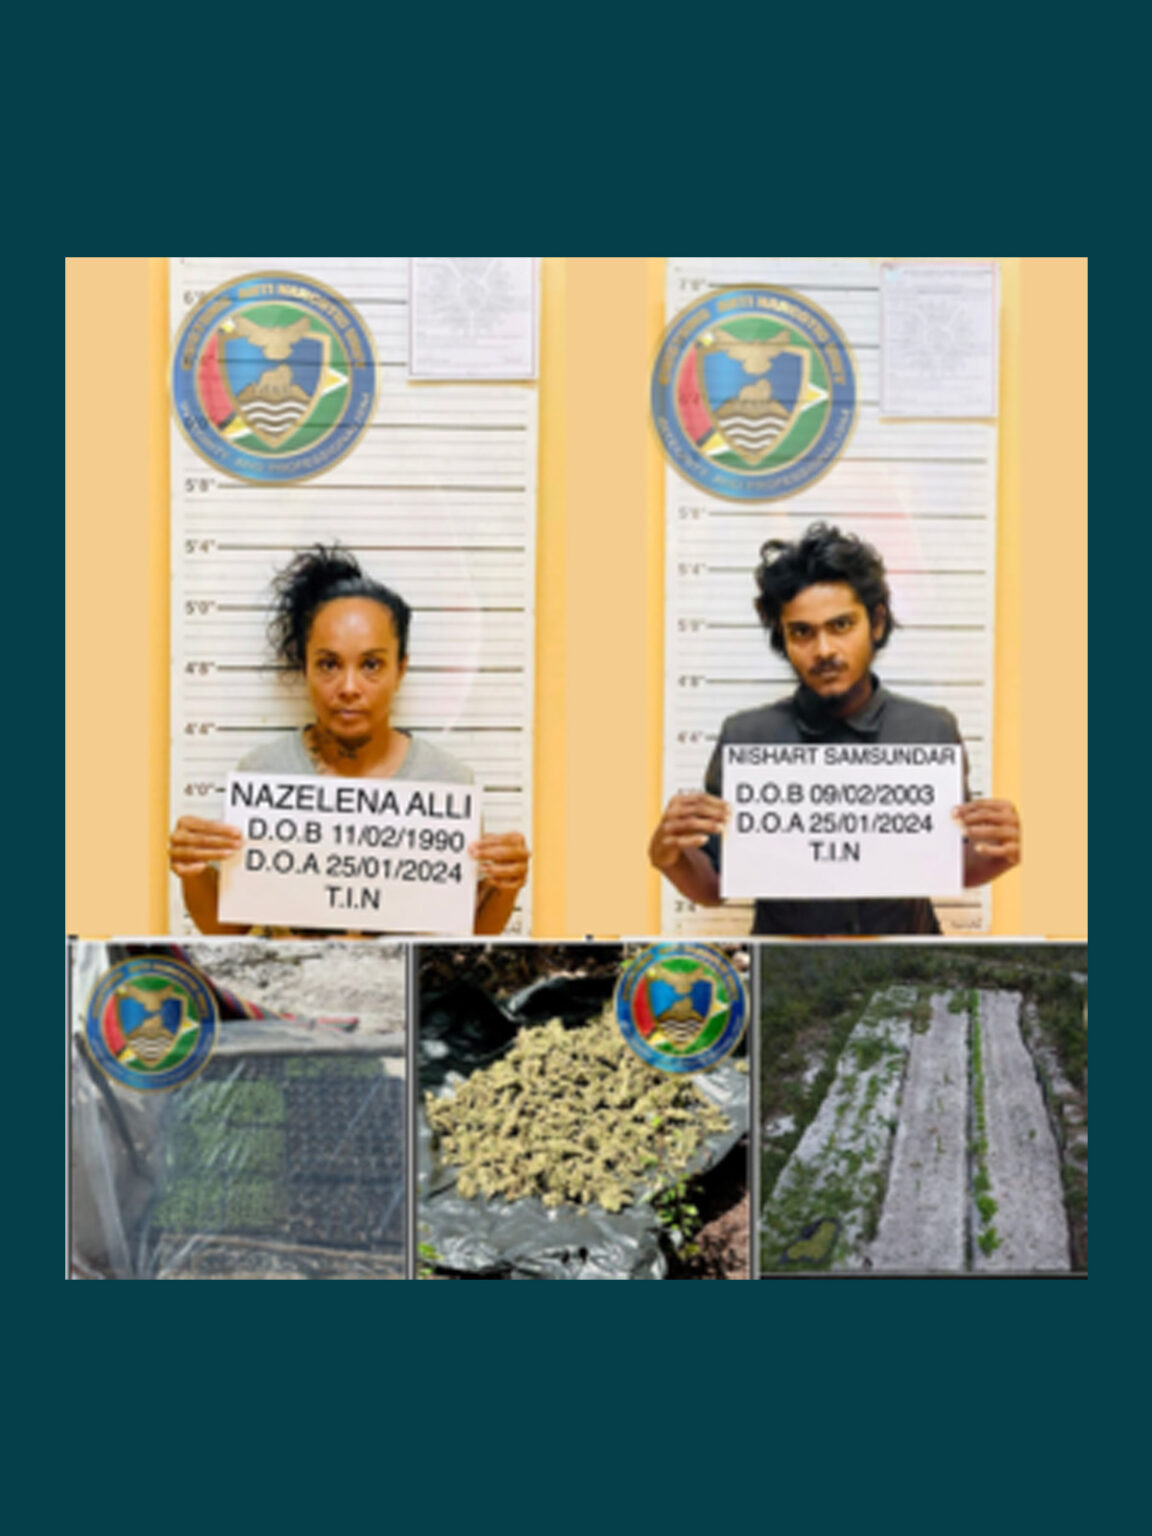 CANU's eradication exercise at Hauraruni Village off the Soesdyke/Linden Highway, resulted in the arrest of two, the seizure of 1.976 kgs. of cannabis, and several plants and one (1) 12-gauge cartridge